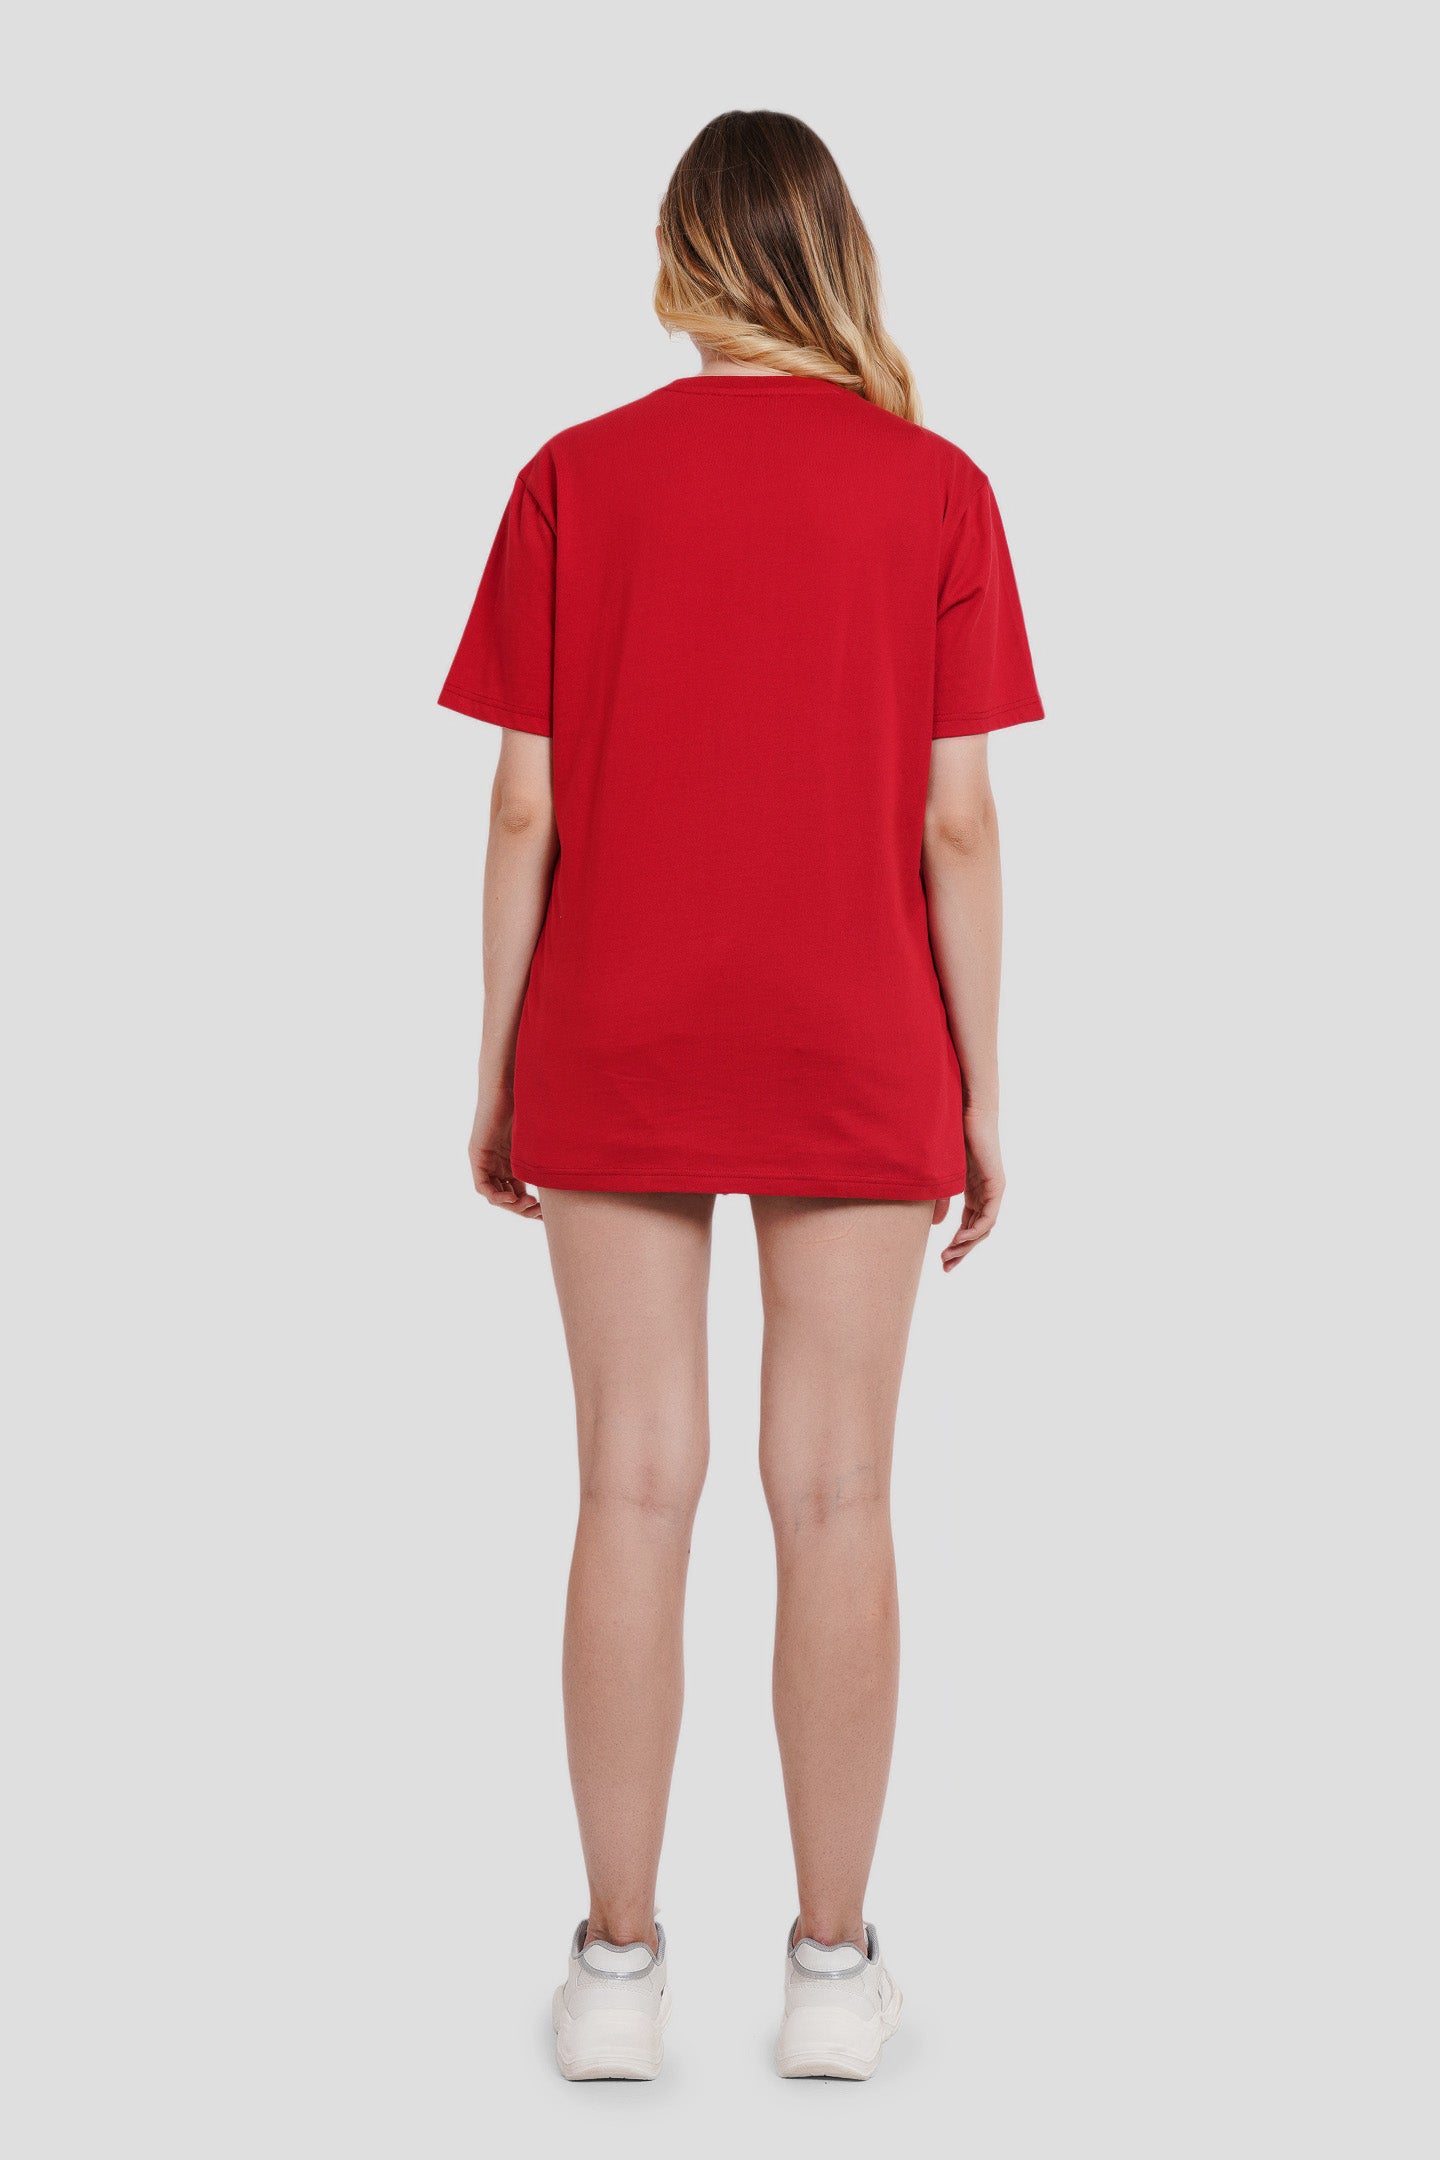 Stay Underrated Red Boyfriend Fit T-Shirt Women Pic 4